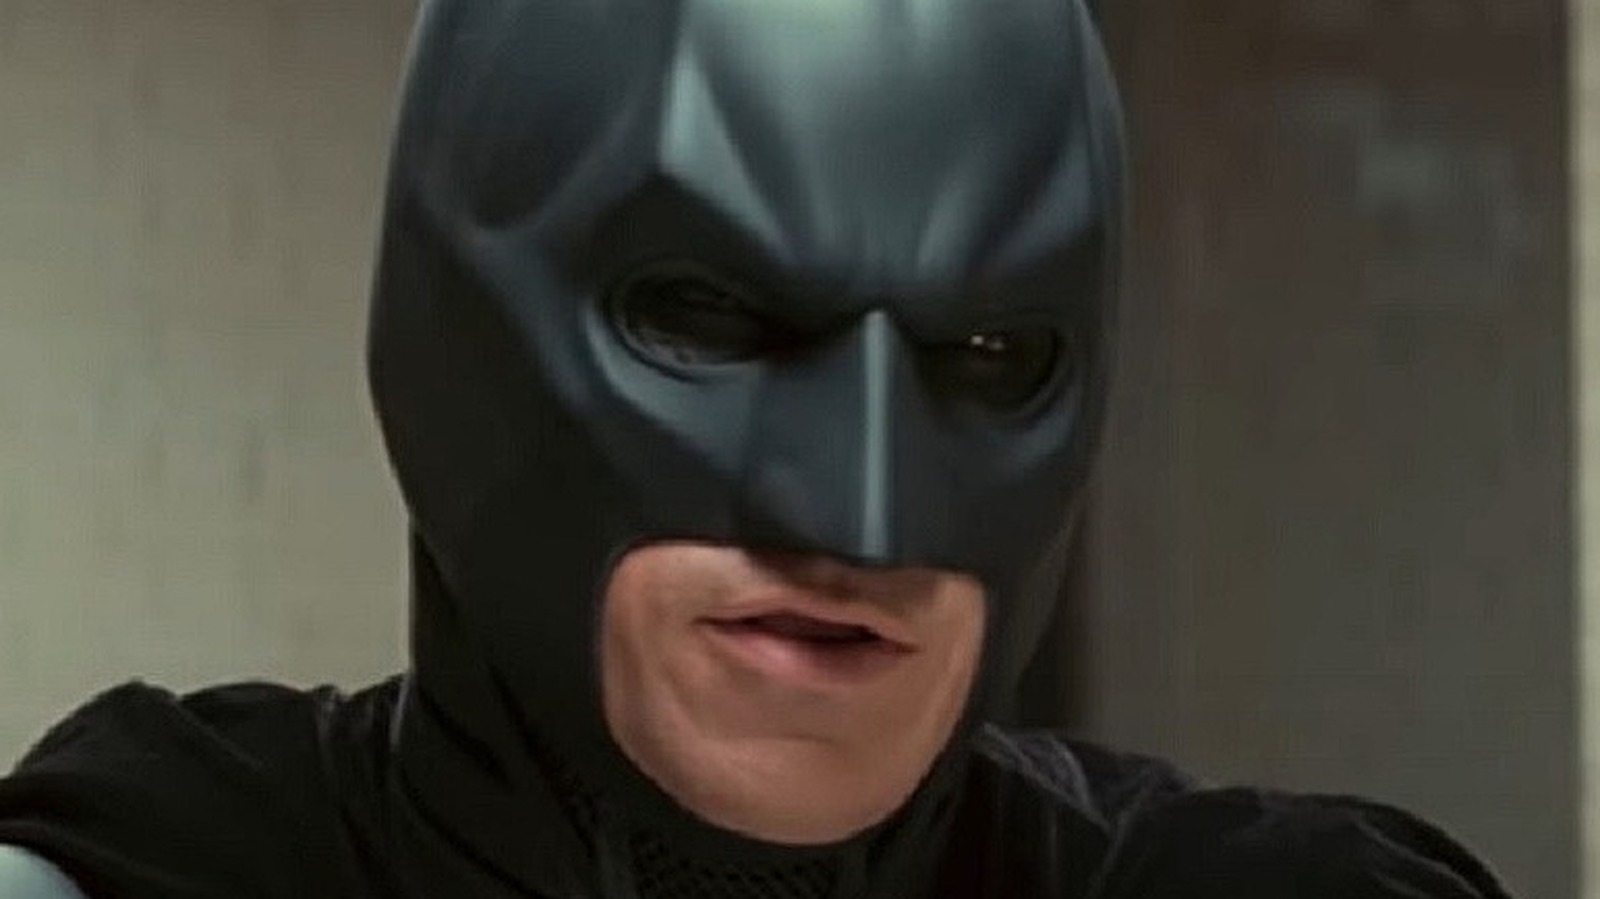 Christian Bale Would Play Batman Again Under One Condition